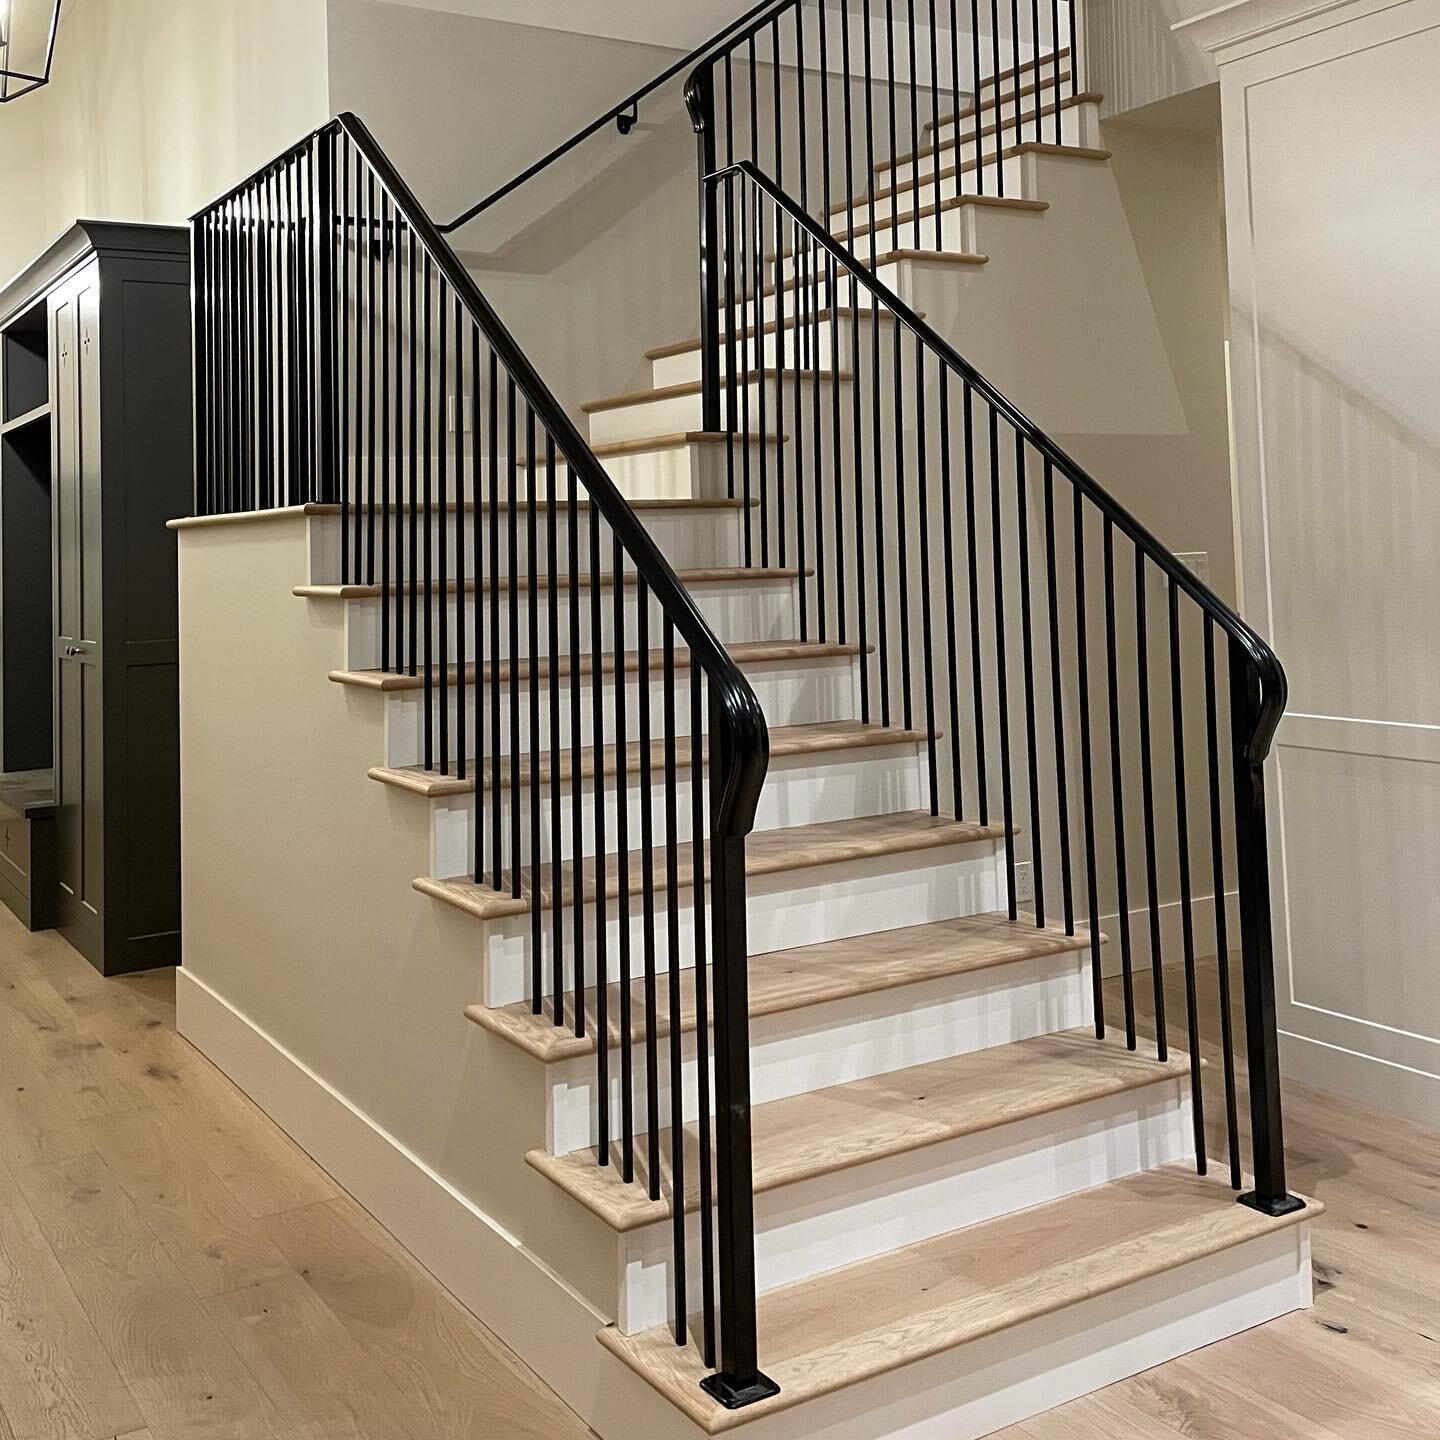 Interior Railings in a brand new house build